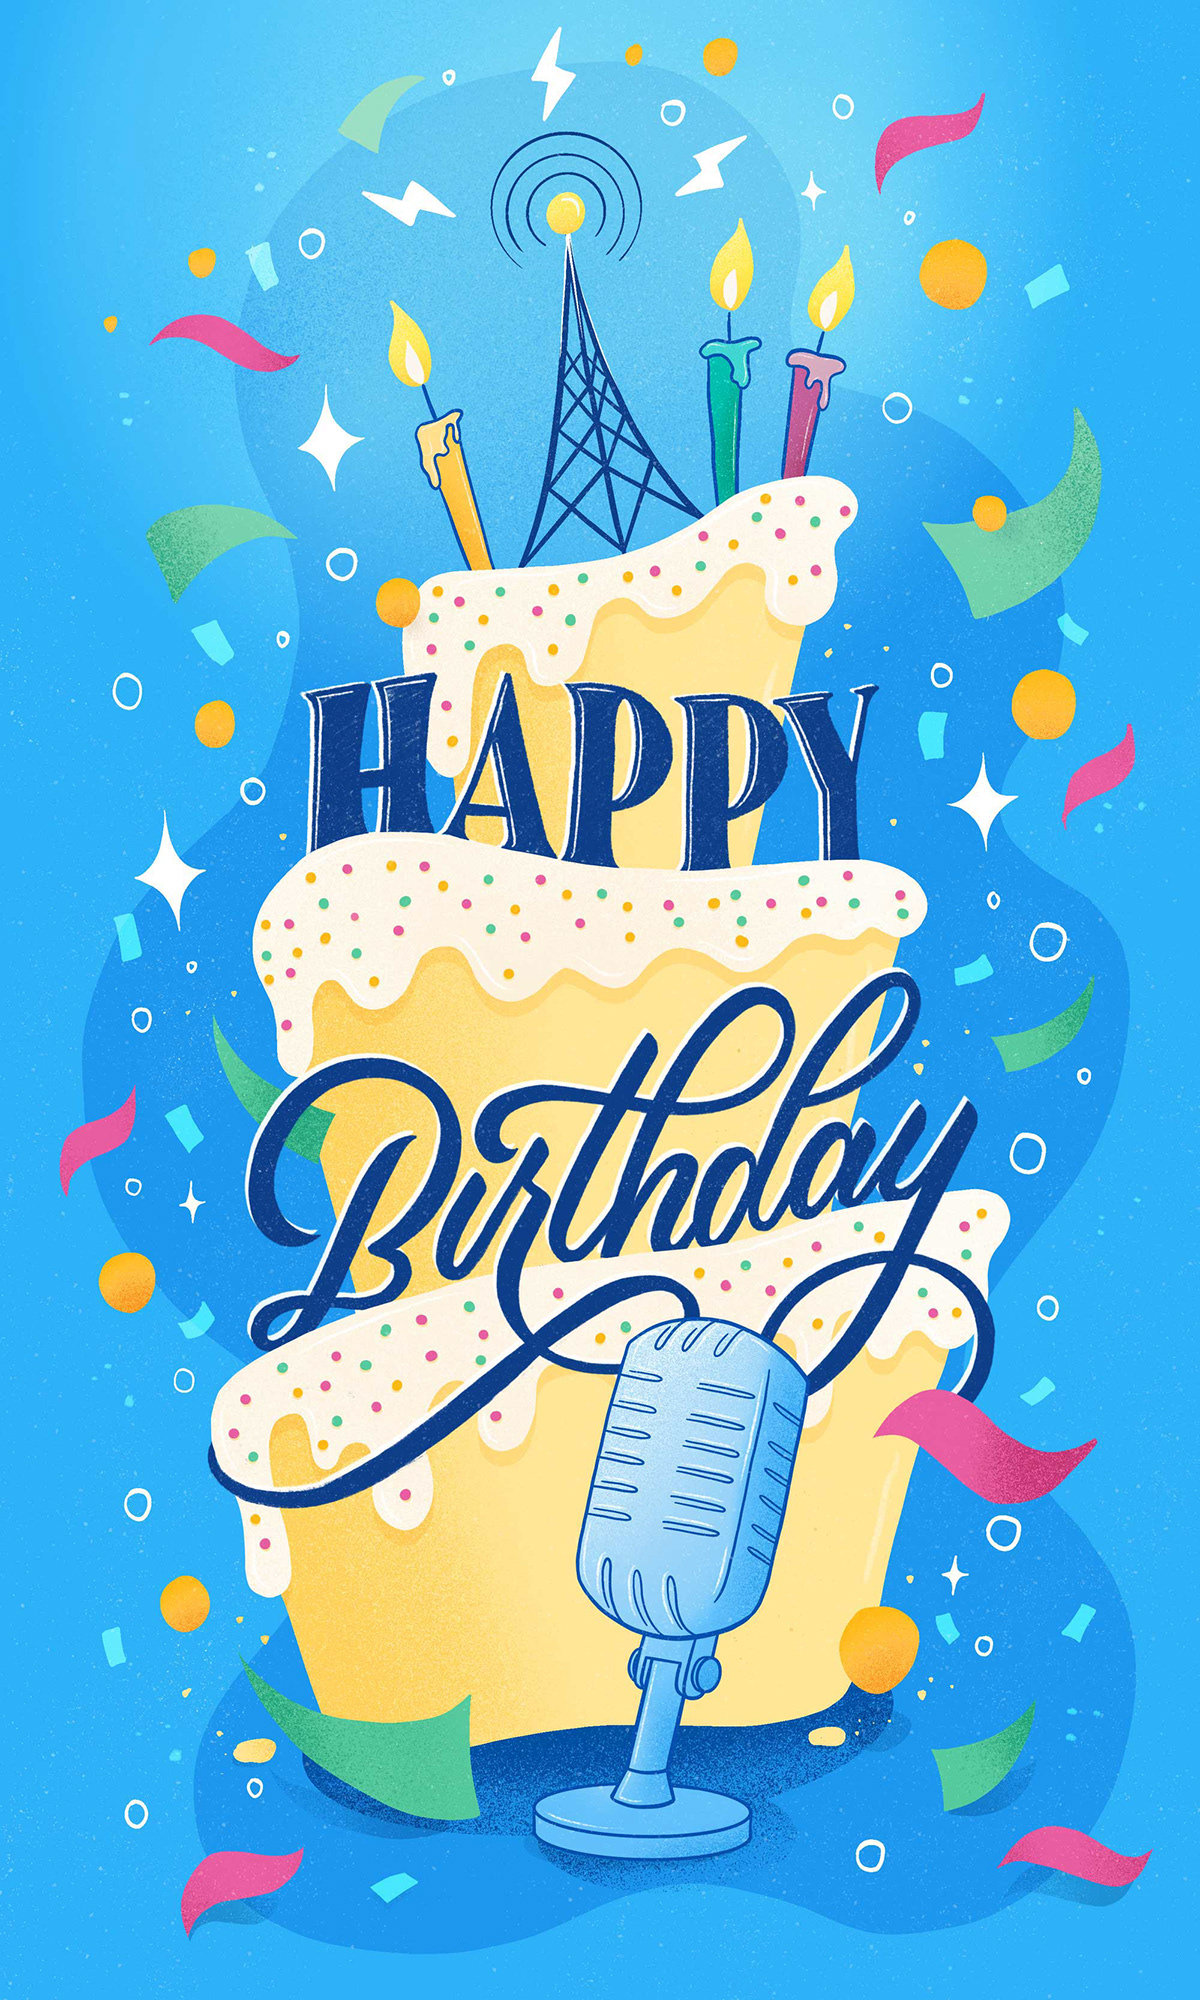 Hand lettering and illustration with a cake and radio tower and confetti